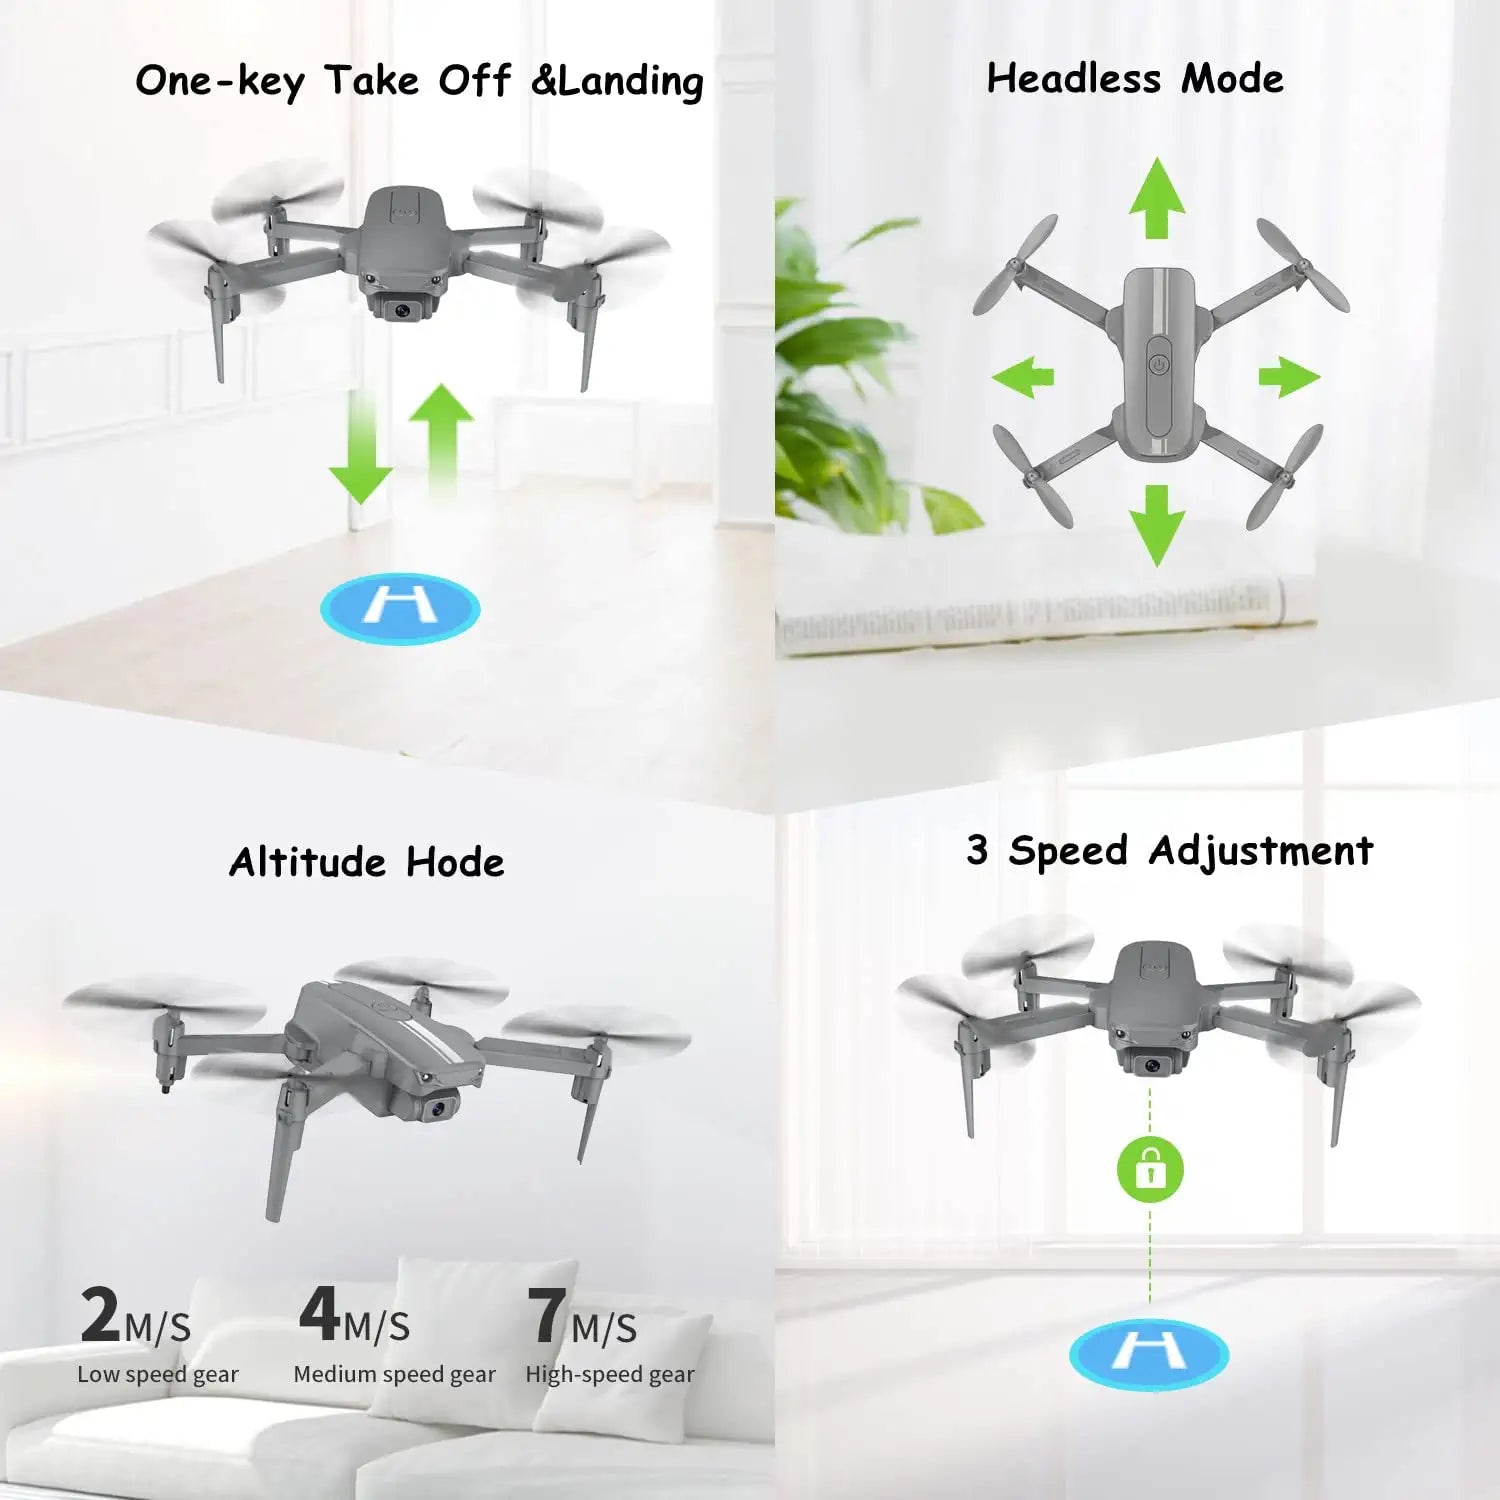 Zuhafa S17 Mini Drone - for Adults/Kids,720P HD FPV Camera,Altitude Hold, Headless Mode, One Key Start/Landing, Speed Adjustment, 3D Flips 2 Batteries, Remote Control Toys Gifts for Kids or Beginners - RCDrone